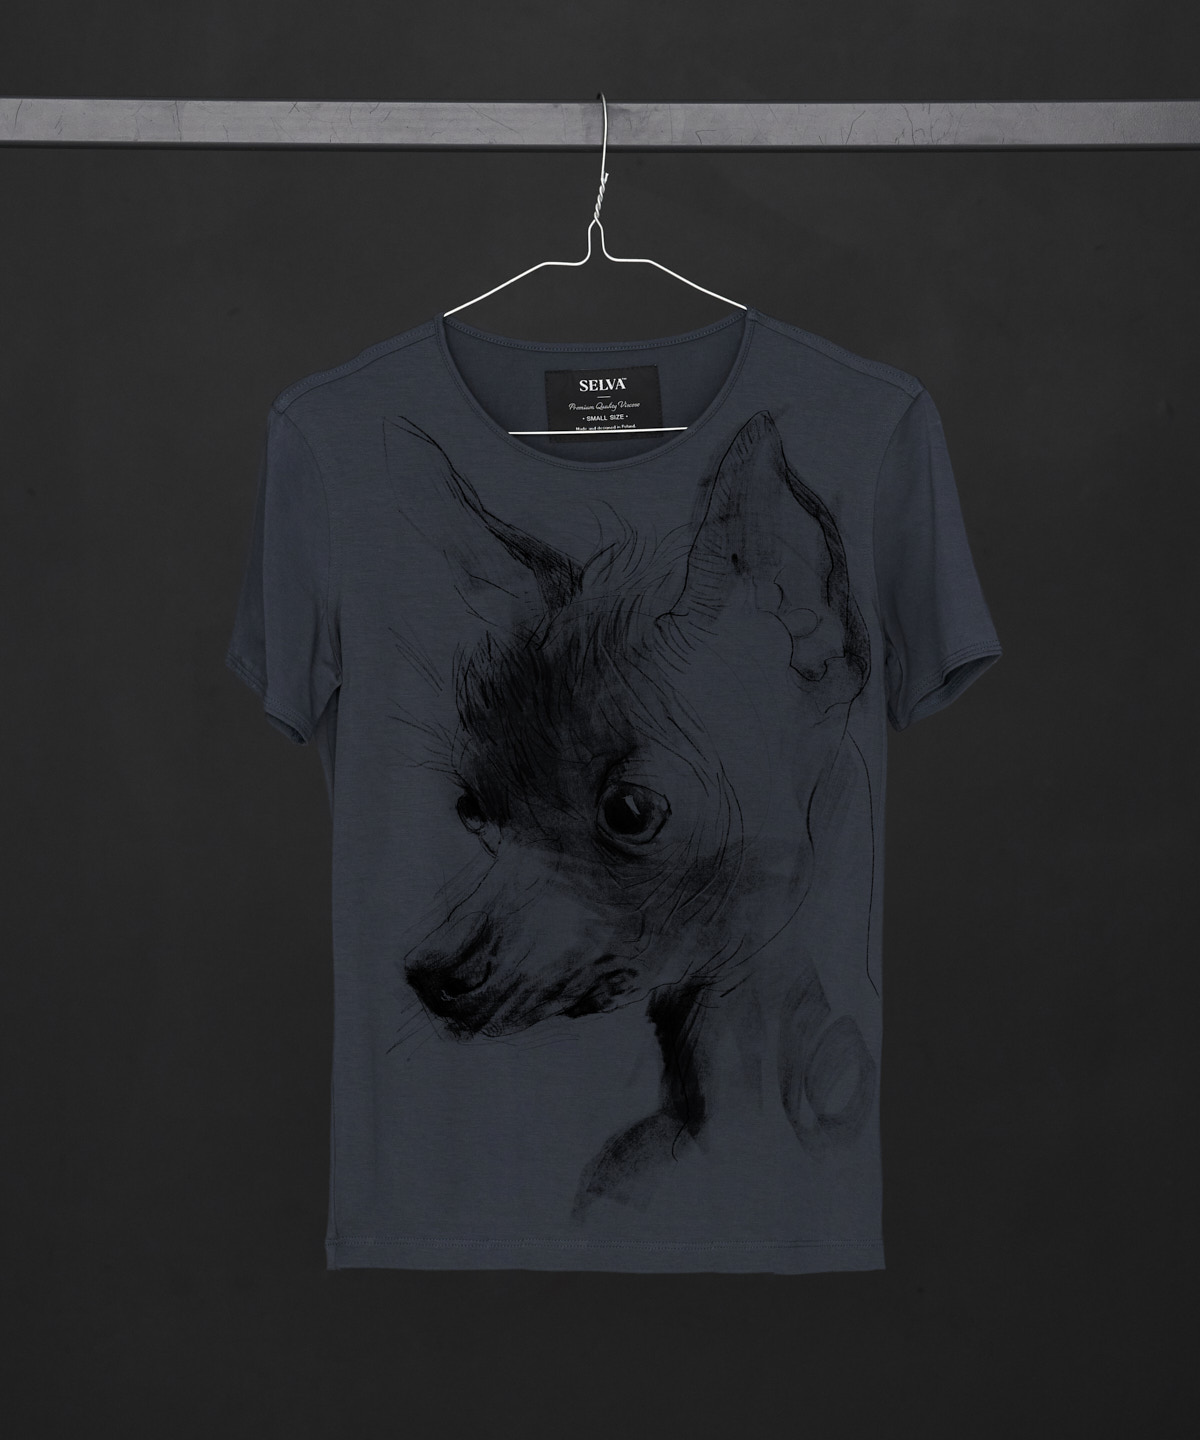 Chinese Crested Dog dark cool gray t-shirt woman